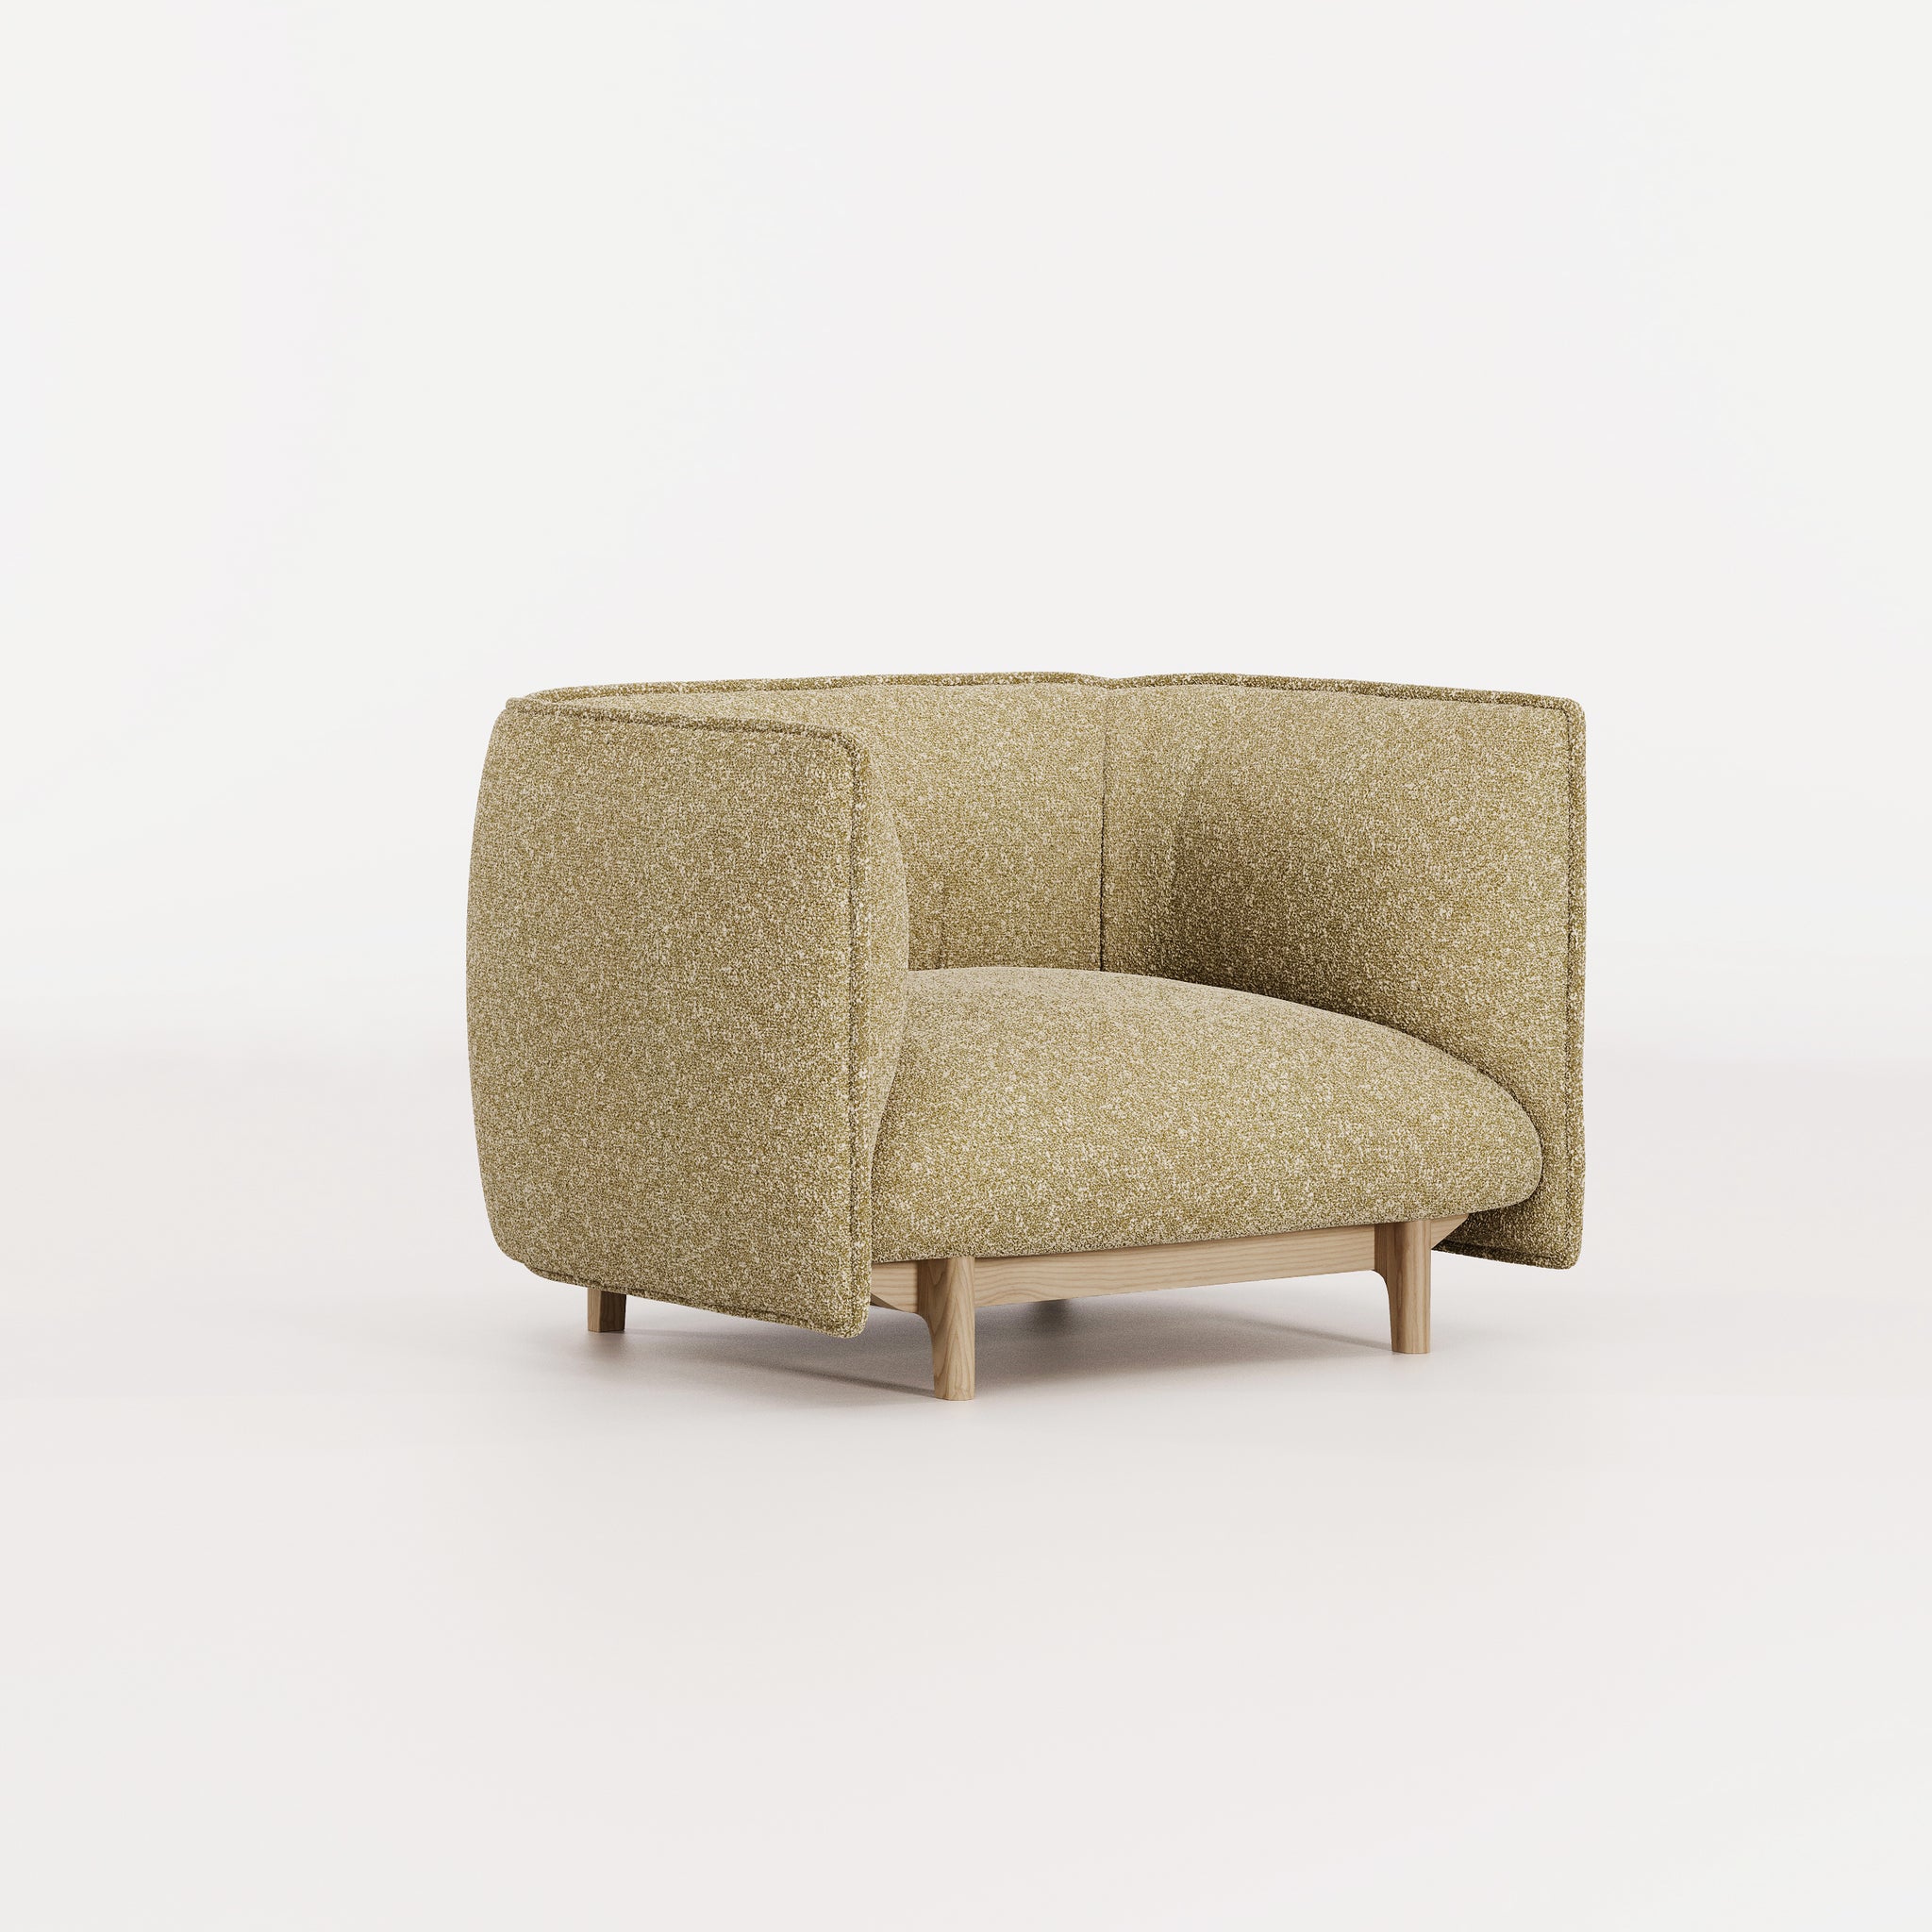 Side view of beam armchair